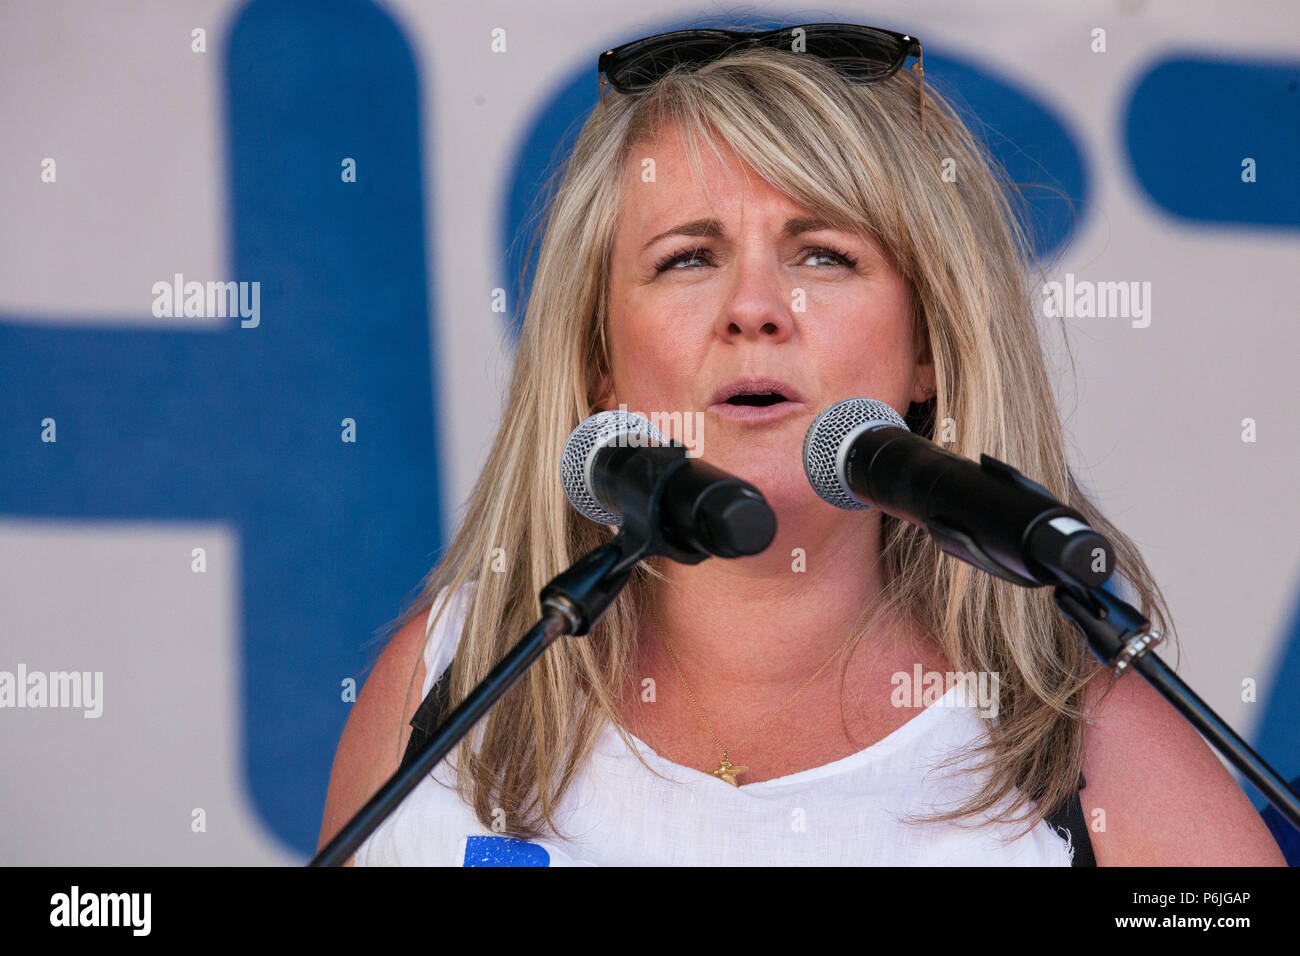 London, UK. 30th June 2018. Former Coronation Street actress Sally Lindsay addresses thousands of people, including many nurses, doctors and health workers, attending a rally and march to mark the 70th birthday of the National Health Service (NHS) and to demand an end to cuts to and privatisation of public services. The event was organised by the People's Assembly Against Austerity, Health Campaigns Together, the TUC and eleven other health trade unions. Credit: Mark Kerrison/Alamy Live News Stock Photo